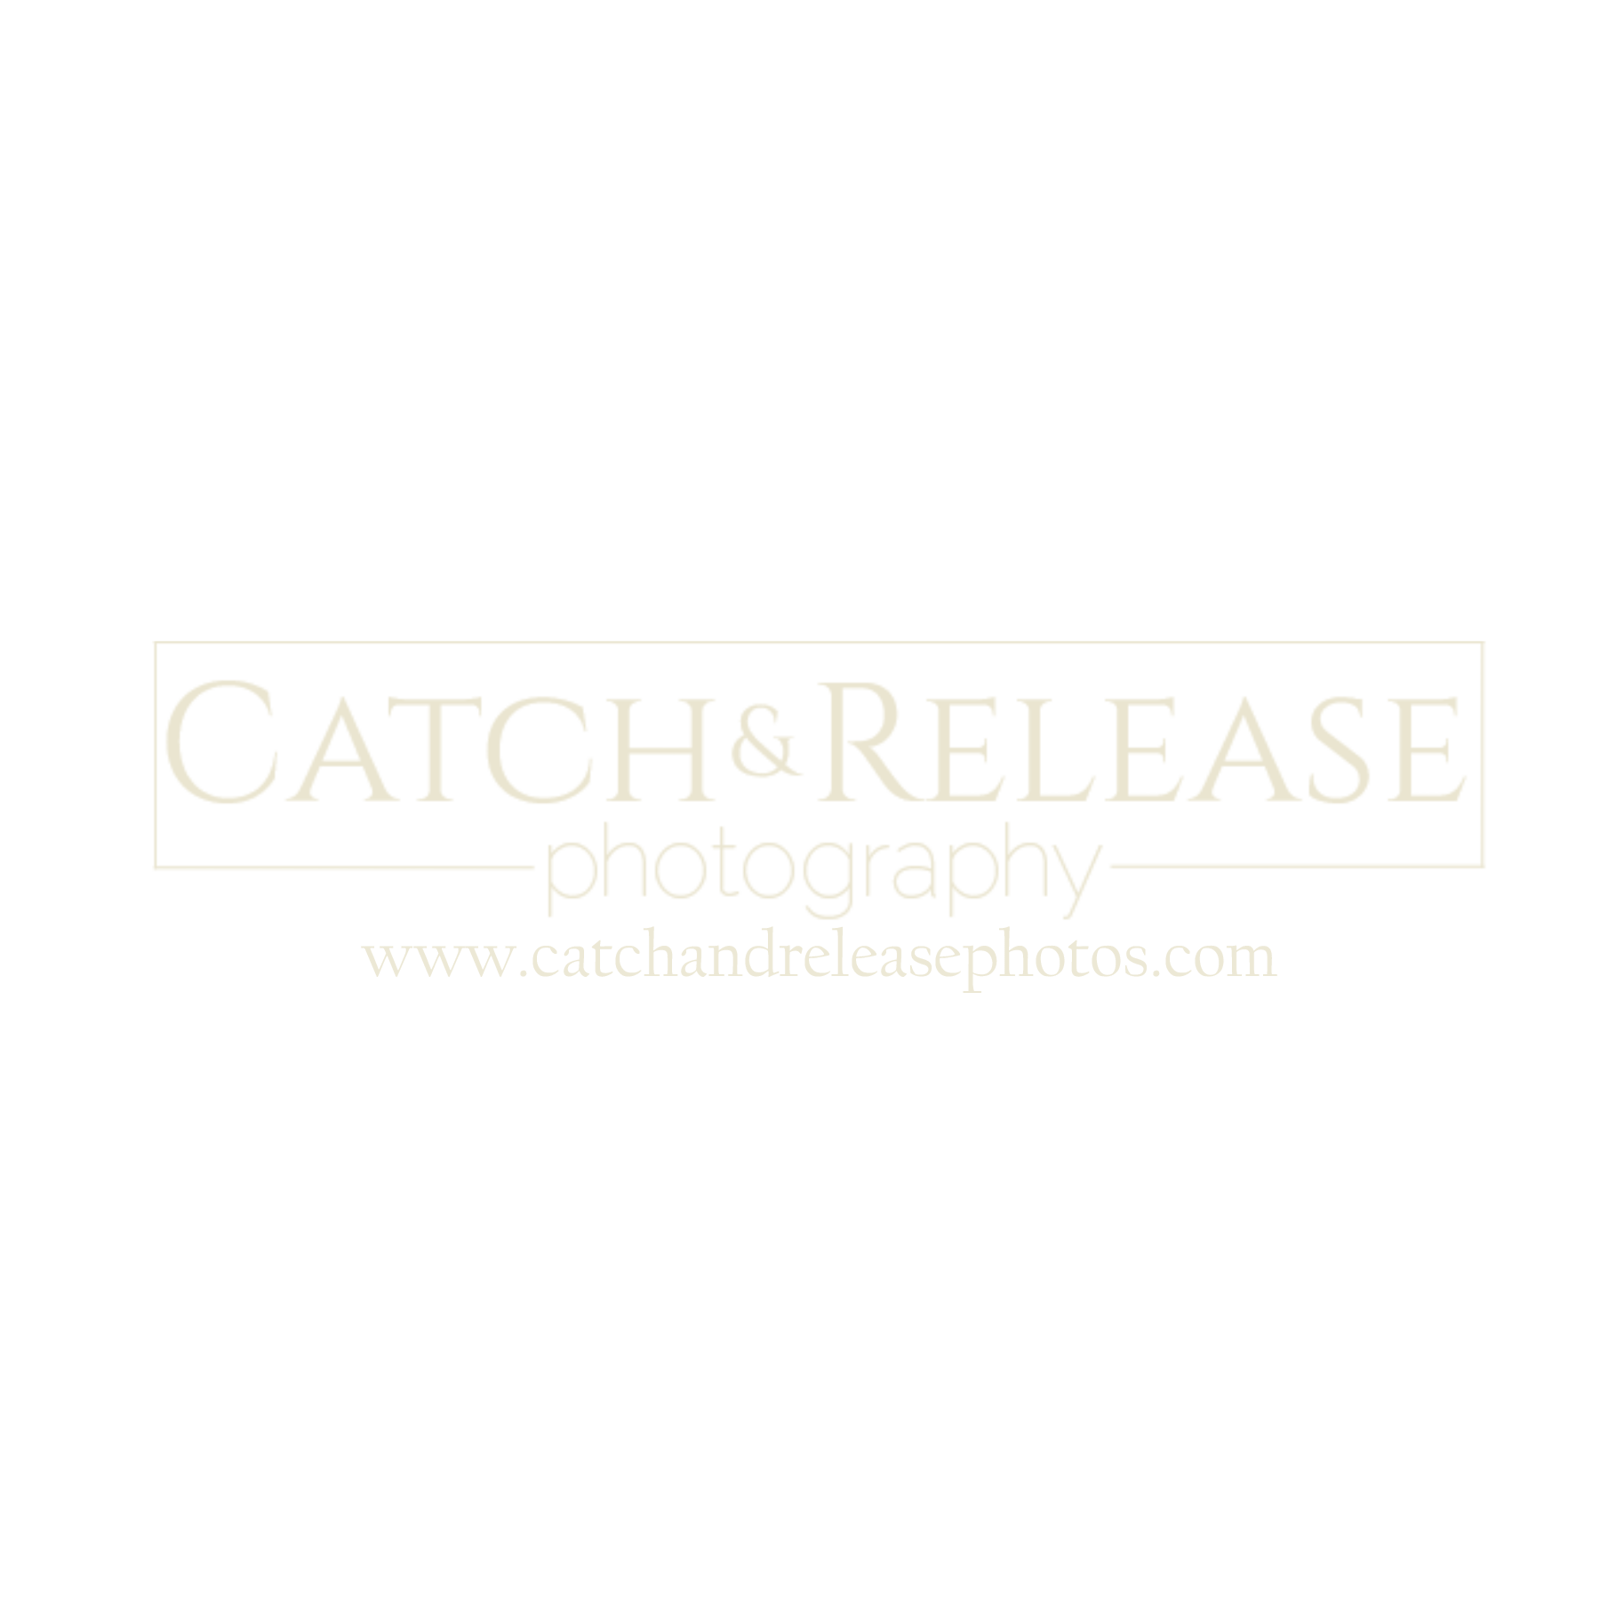 Catch & Release Photography